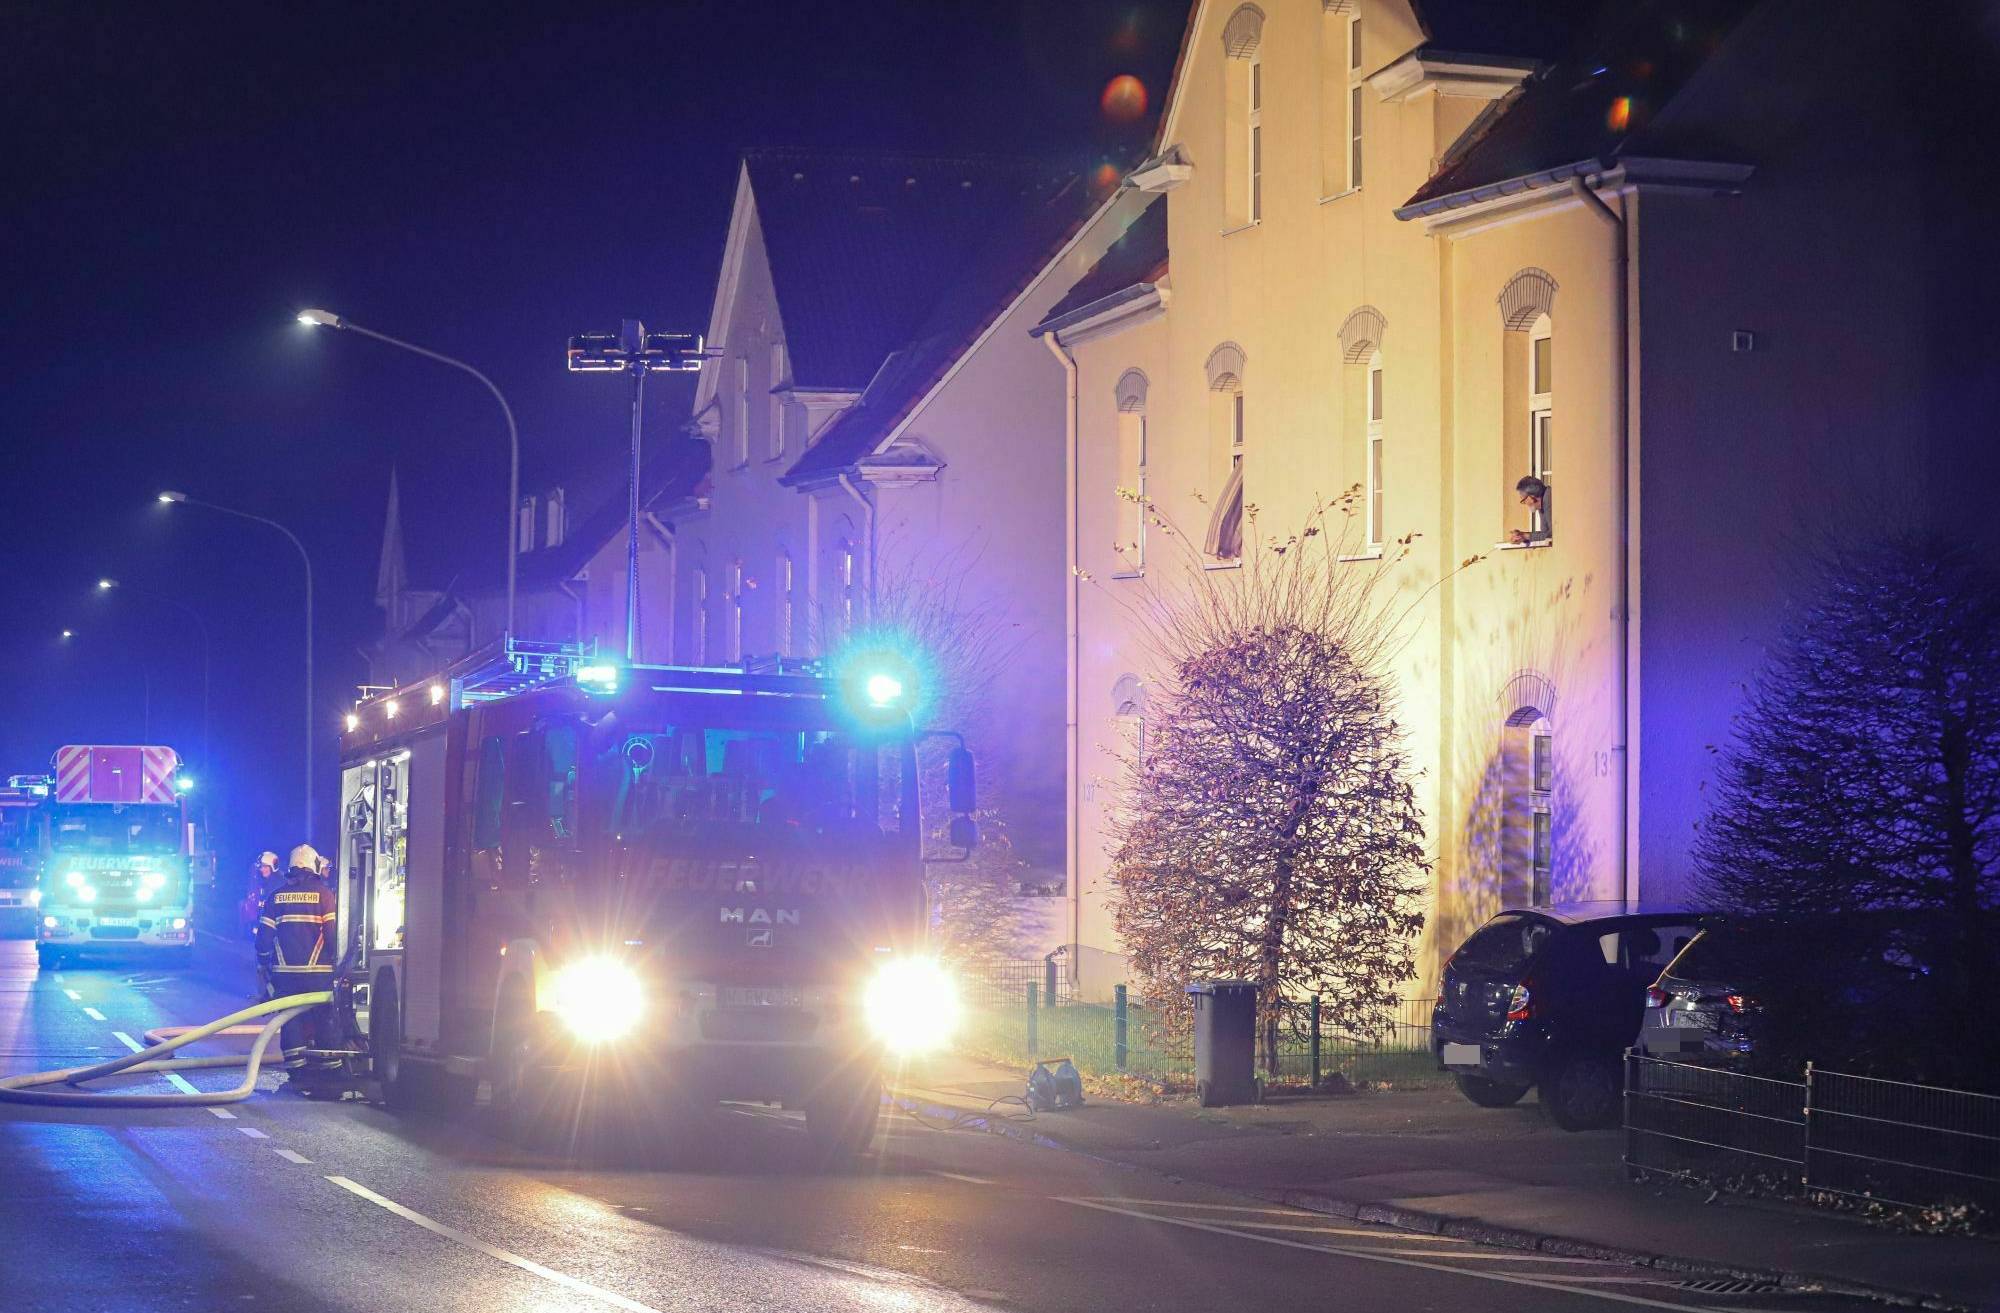 Brand in Mehrfamilienhaus​ in Wuppertal-Ronsdorf